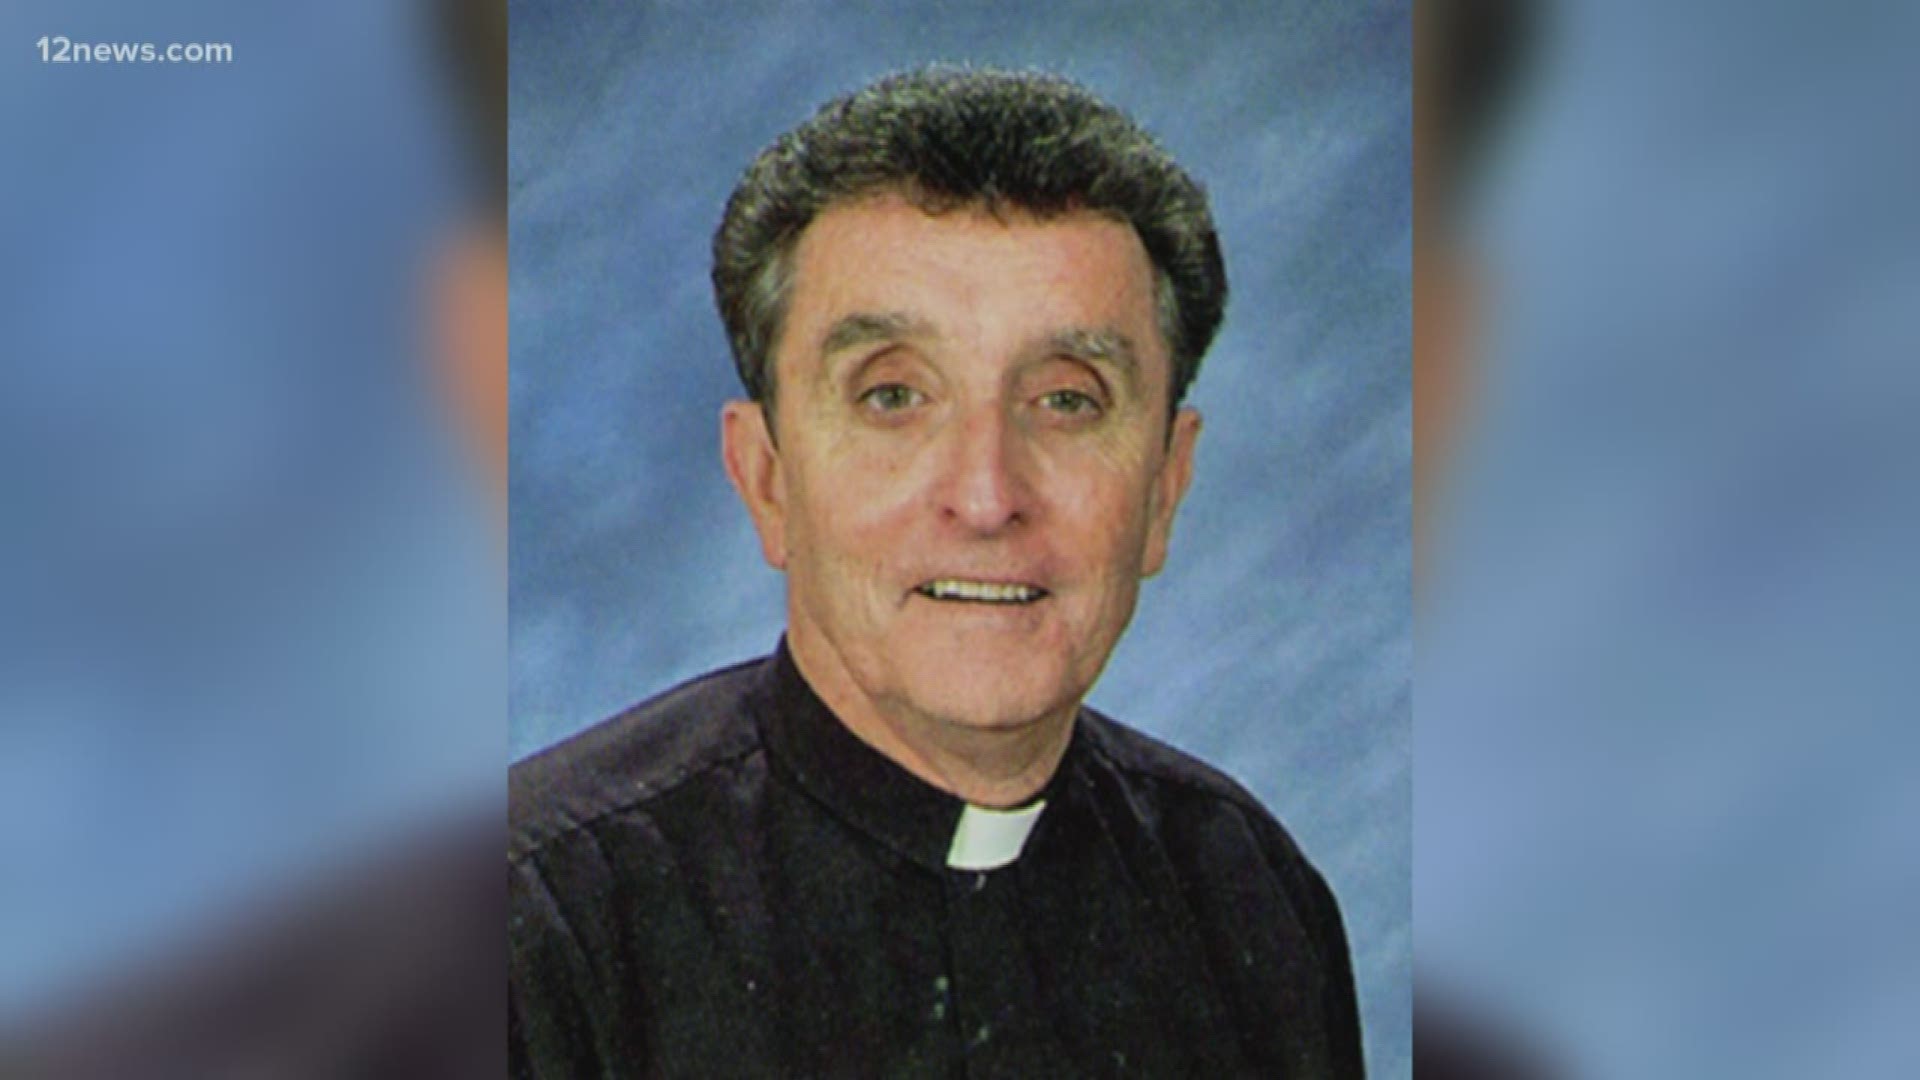 A grand jury indicted a Catholic priest on sexual misconduct with a minor. John "Jack" Dallas Spaulding is facing seven felonies.